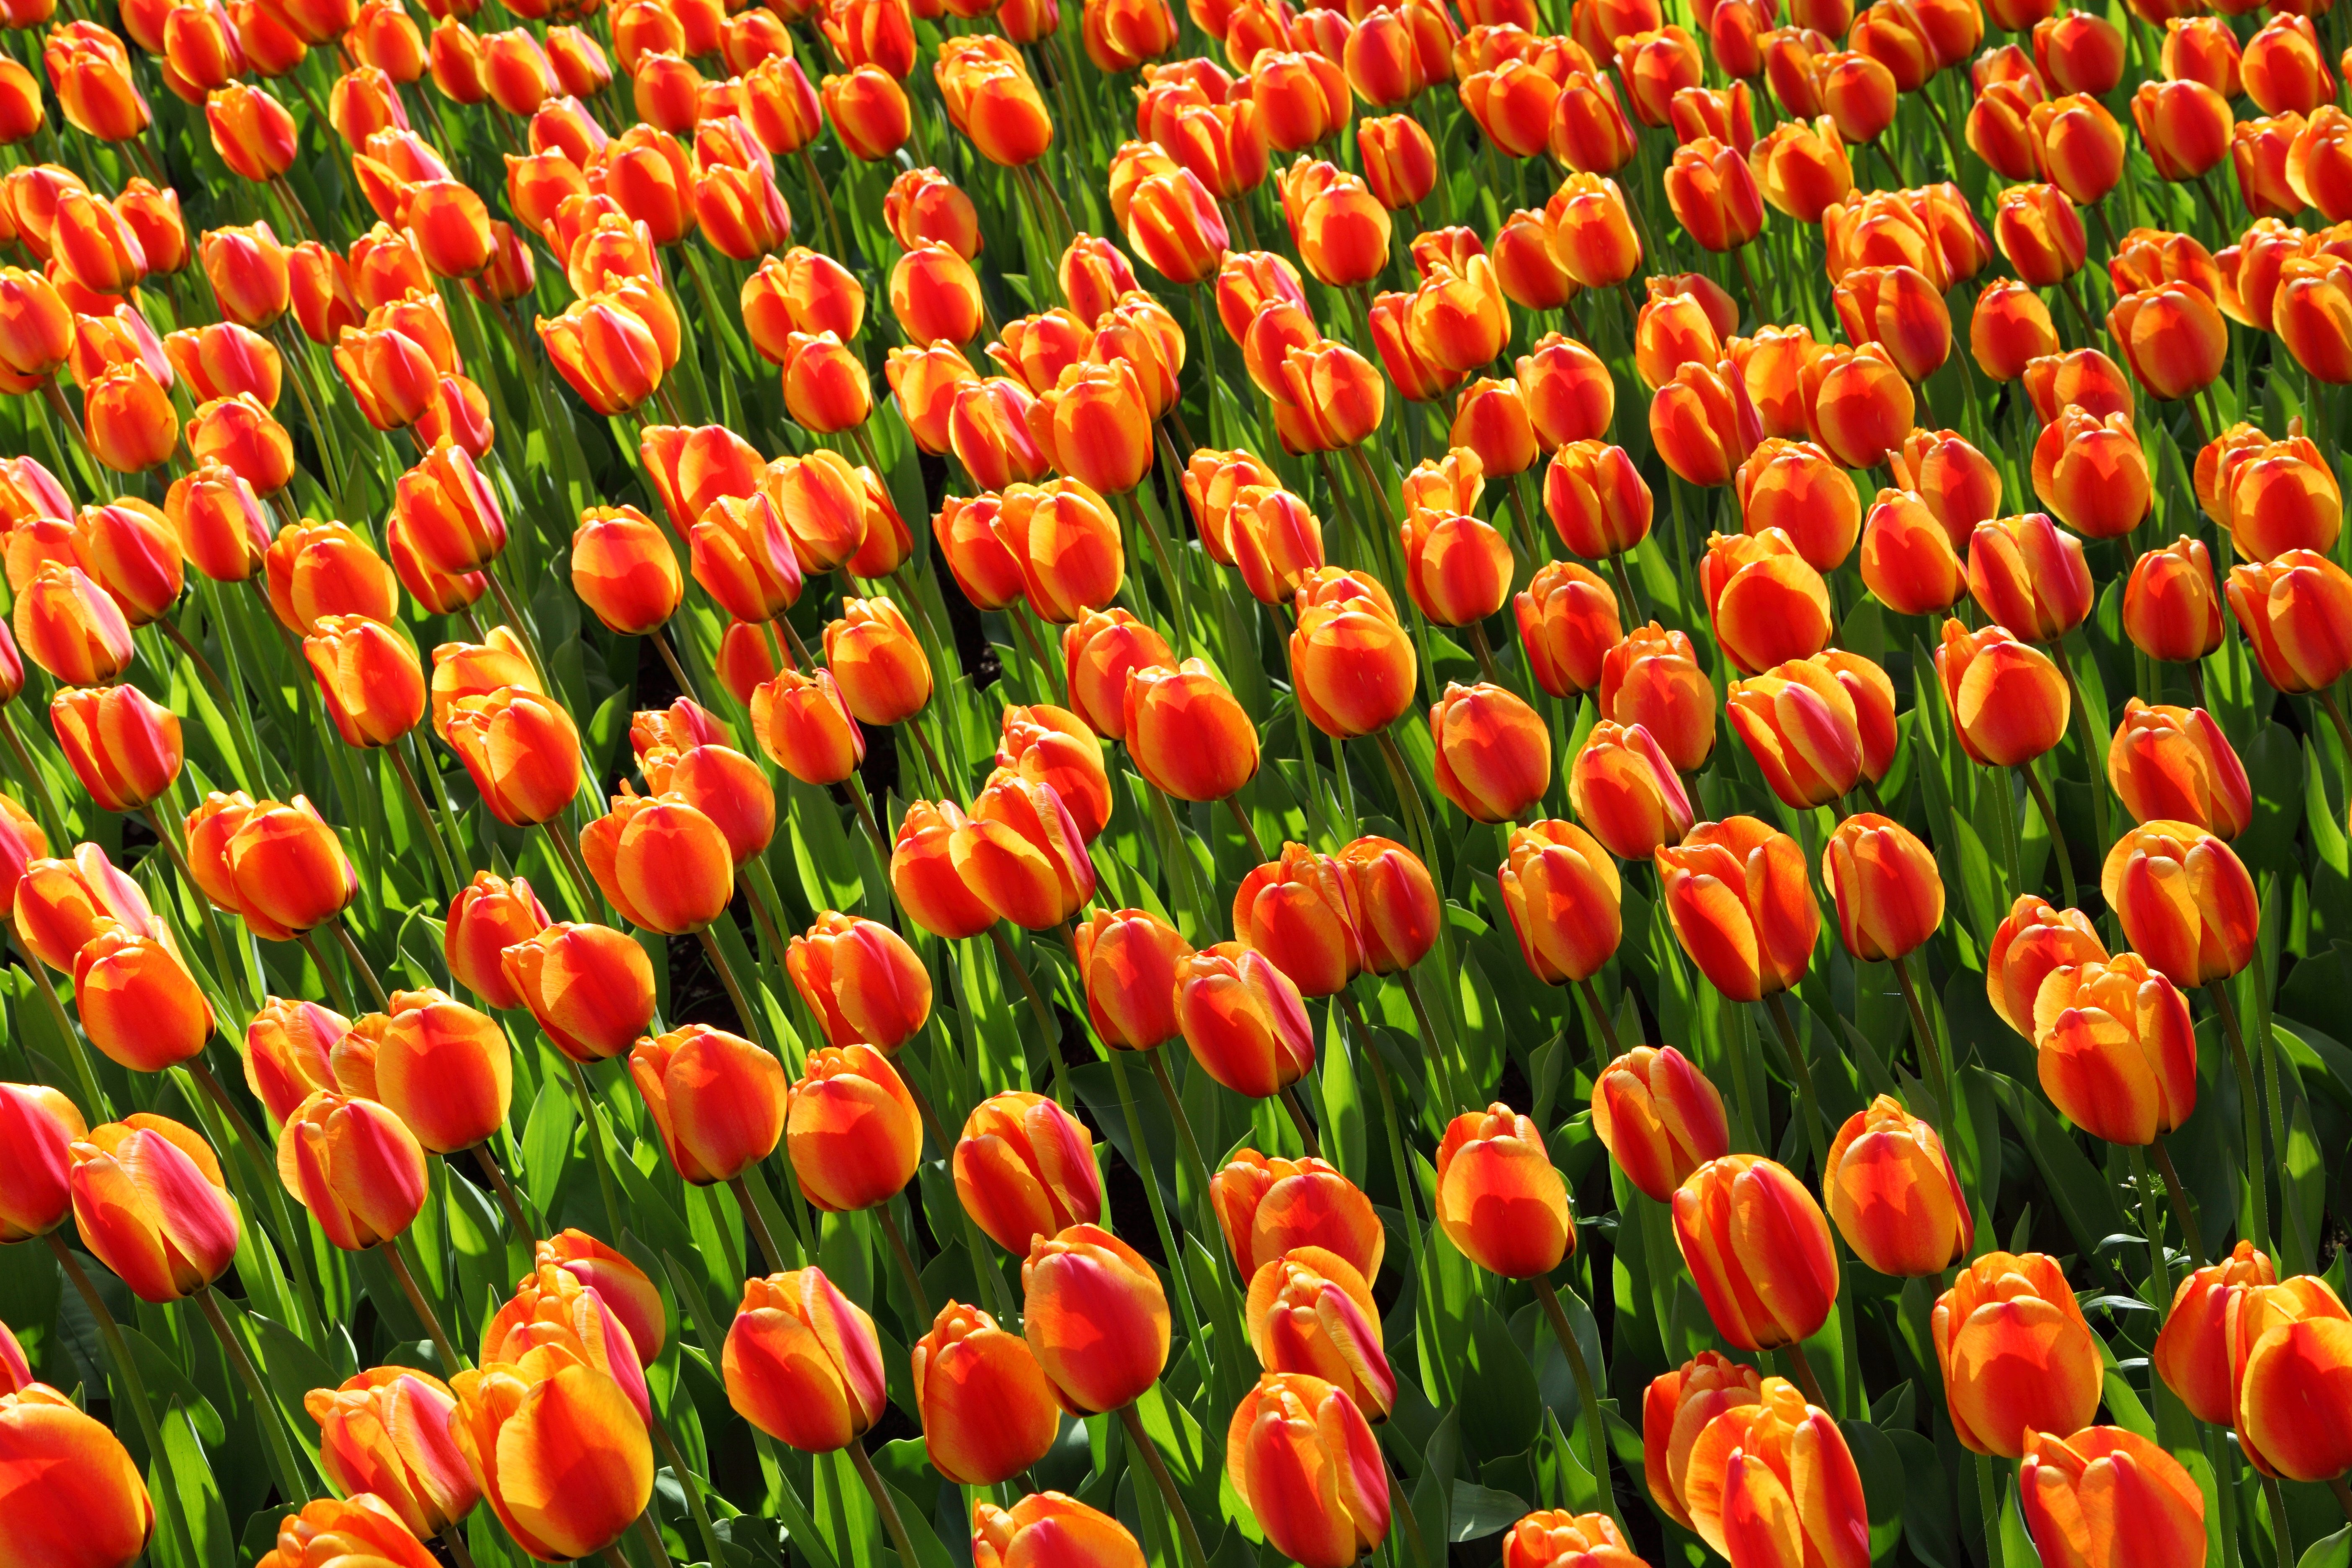 A field of tulips in the Netherlands